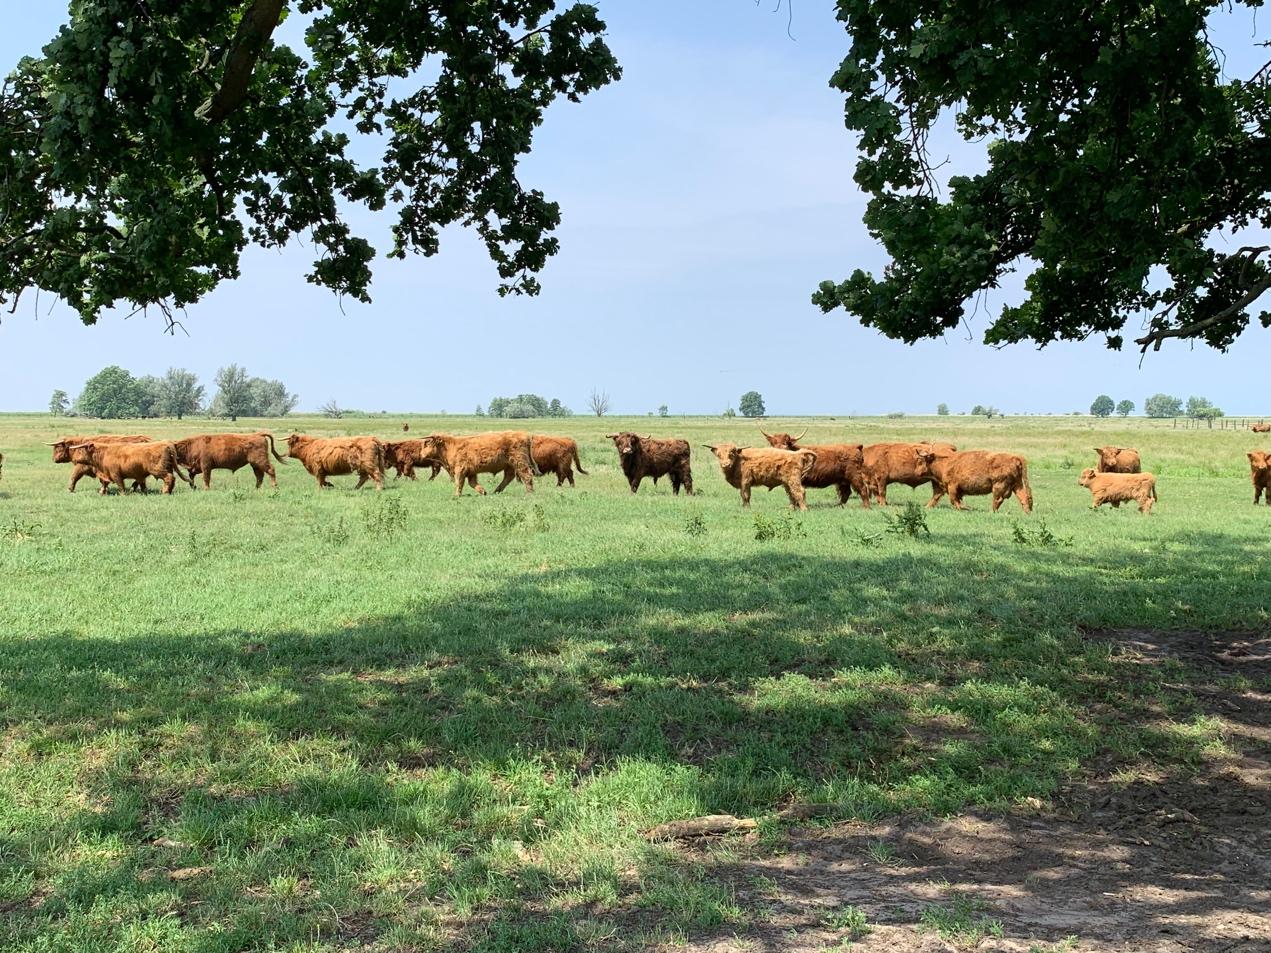 A herd of cattle standing on top of a lush green field

Description automatically generated